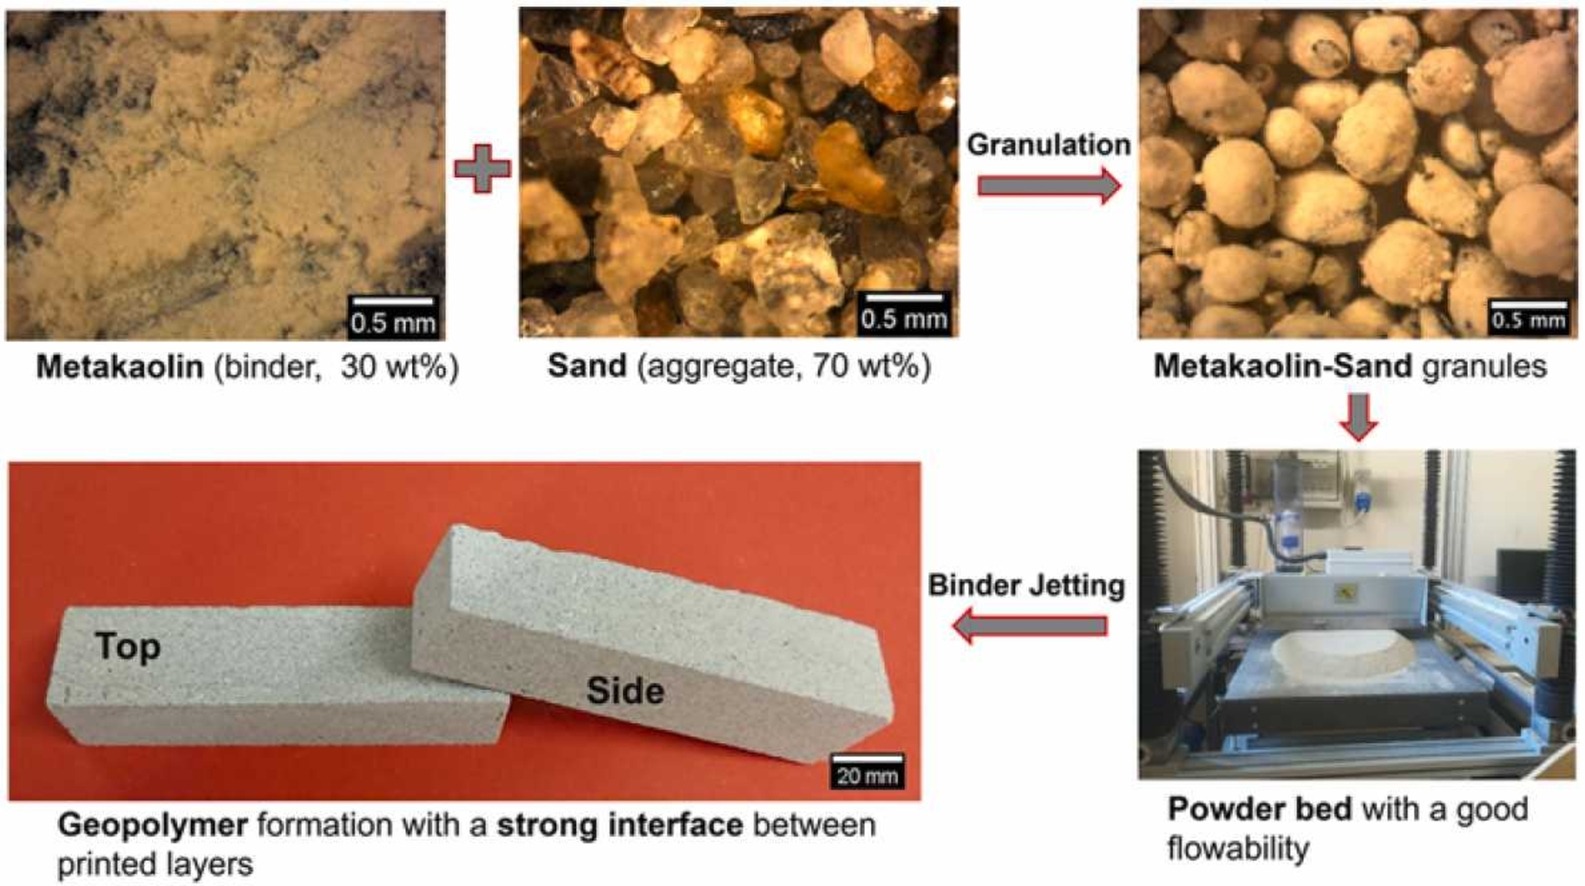 Formation and binder jet 3D printing process for the metakaolin and sand feedstock. Image via Additive Manufacturing.